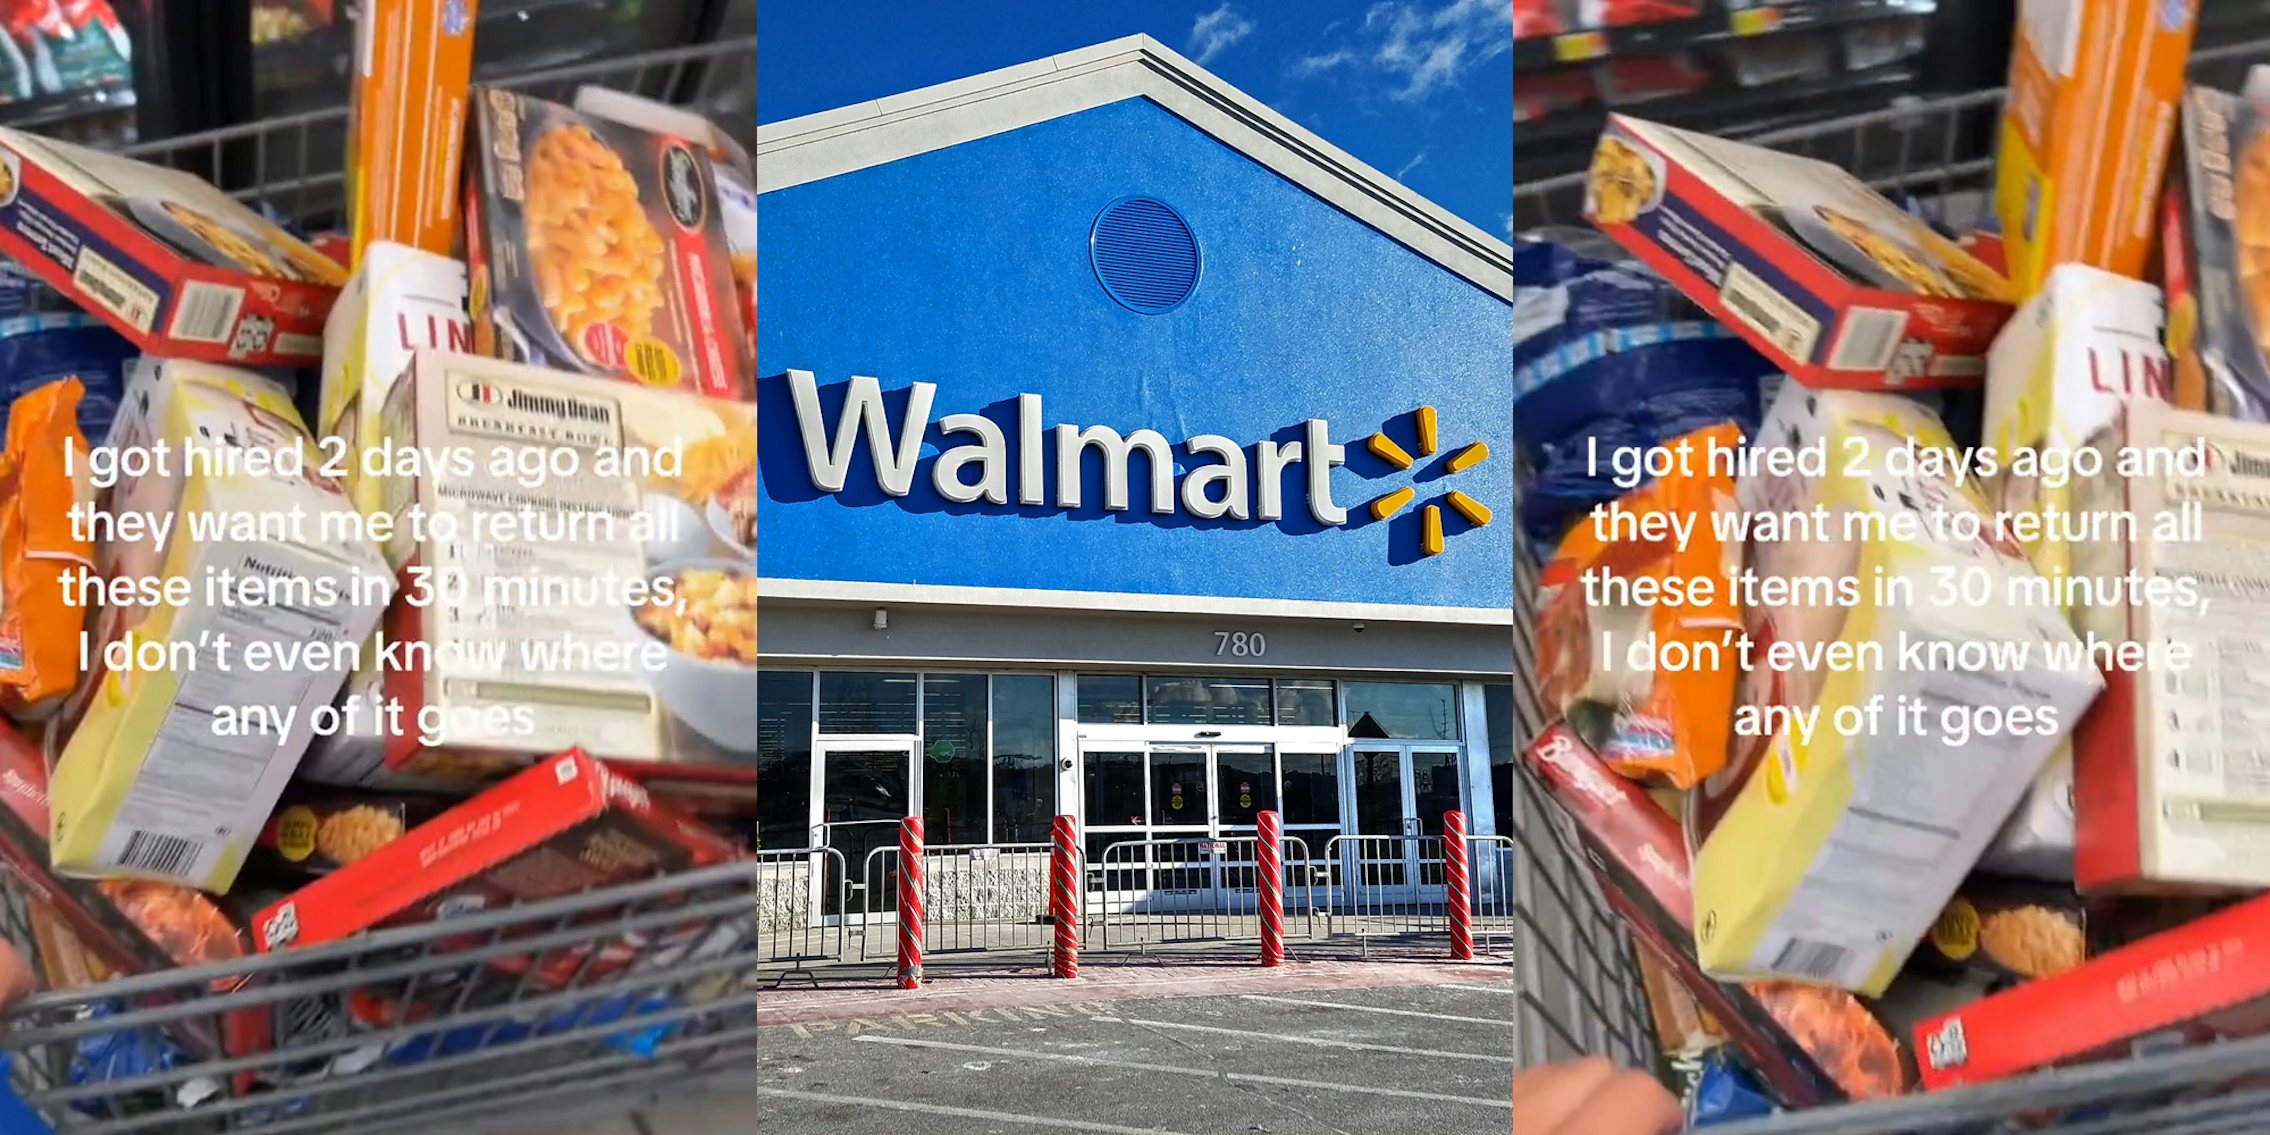 full Walmart cart with caption 'I got hired 2 days ago and they want me to return all these items in 30 minutes, I don't even know where any of it goes' (l) Walmart building with sign (c) full Walmart cart with caption 'I got hired 2 days ago and they want me to return all these items in 30 minutes, I don't even know where any of it goes' (r)